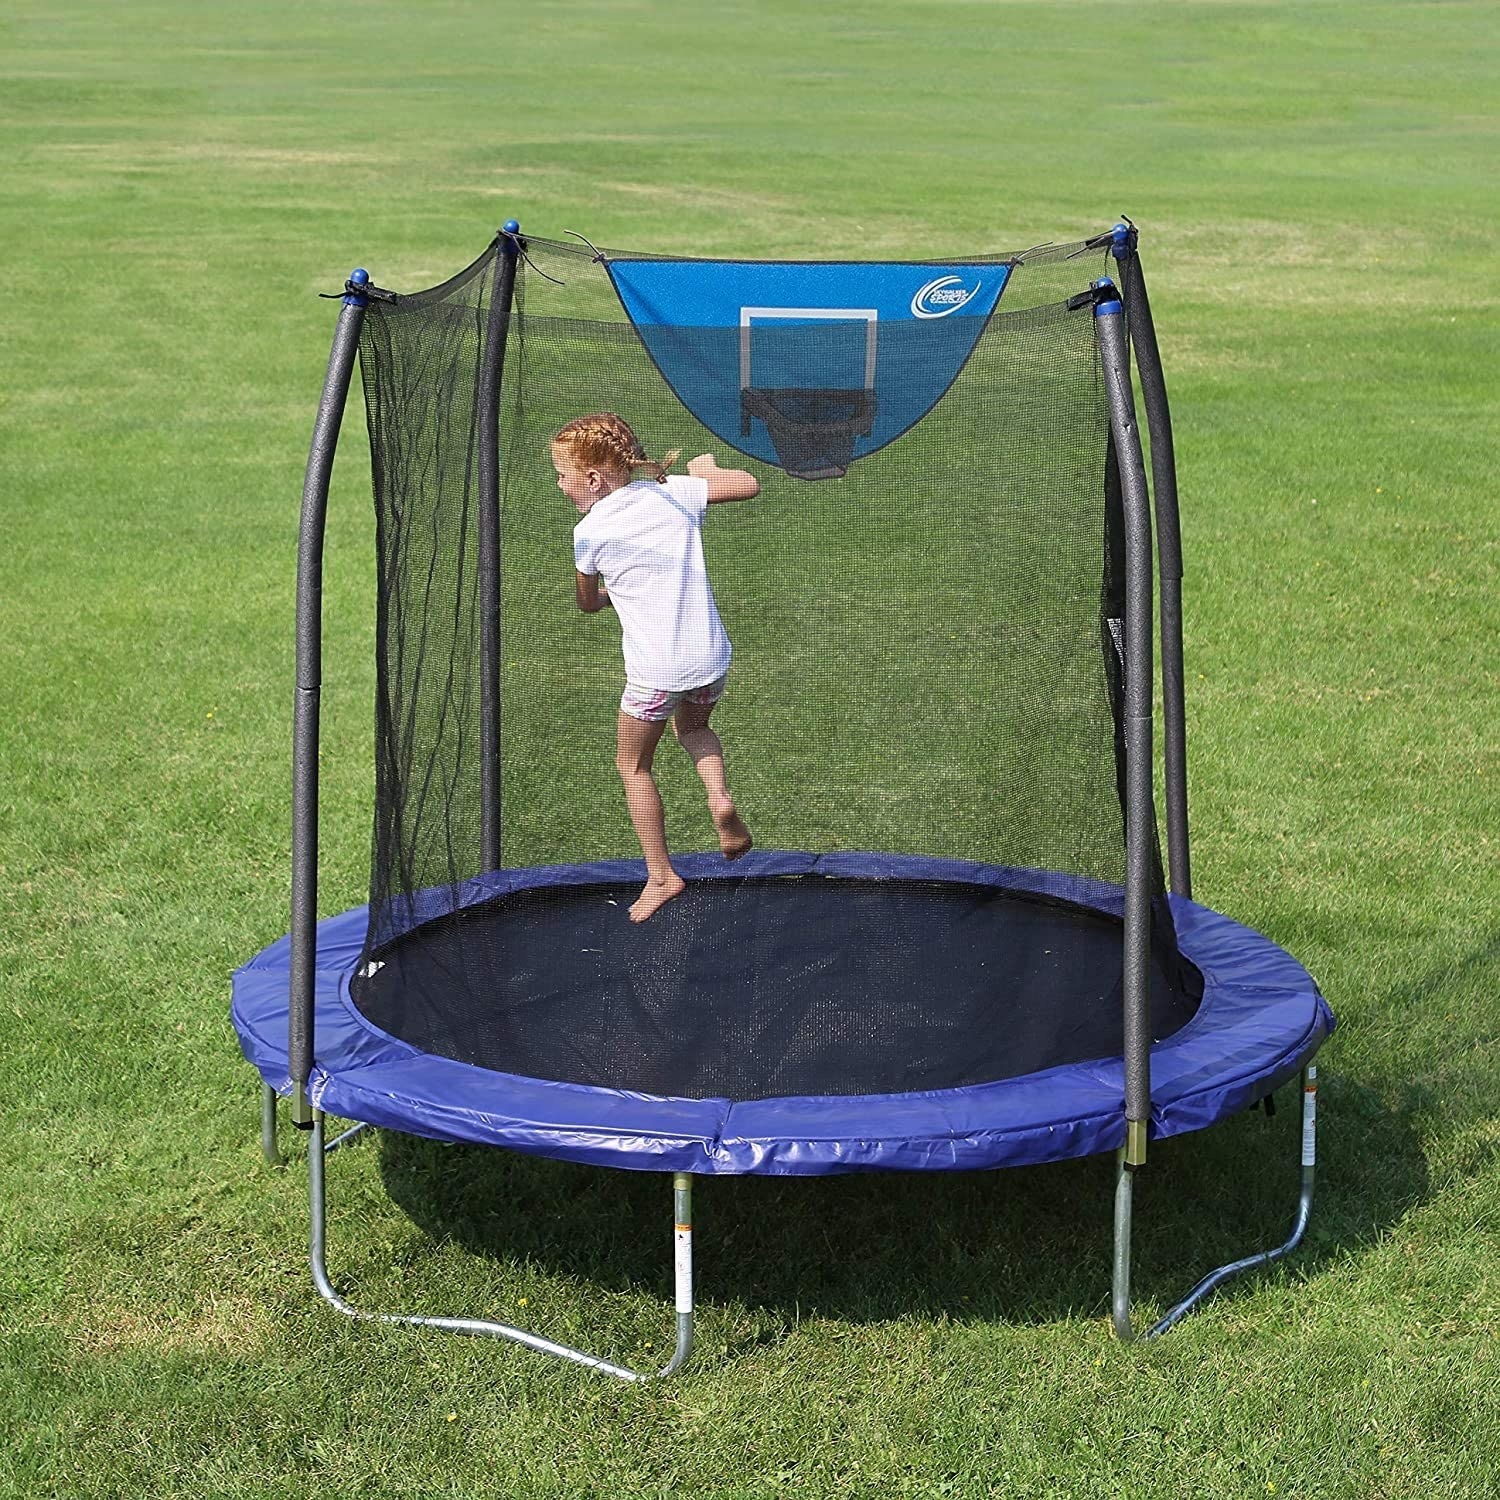 Image of a blue and black trampoline on grass with child playing inside